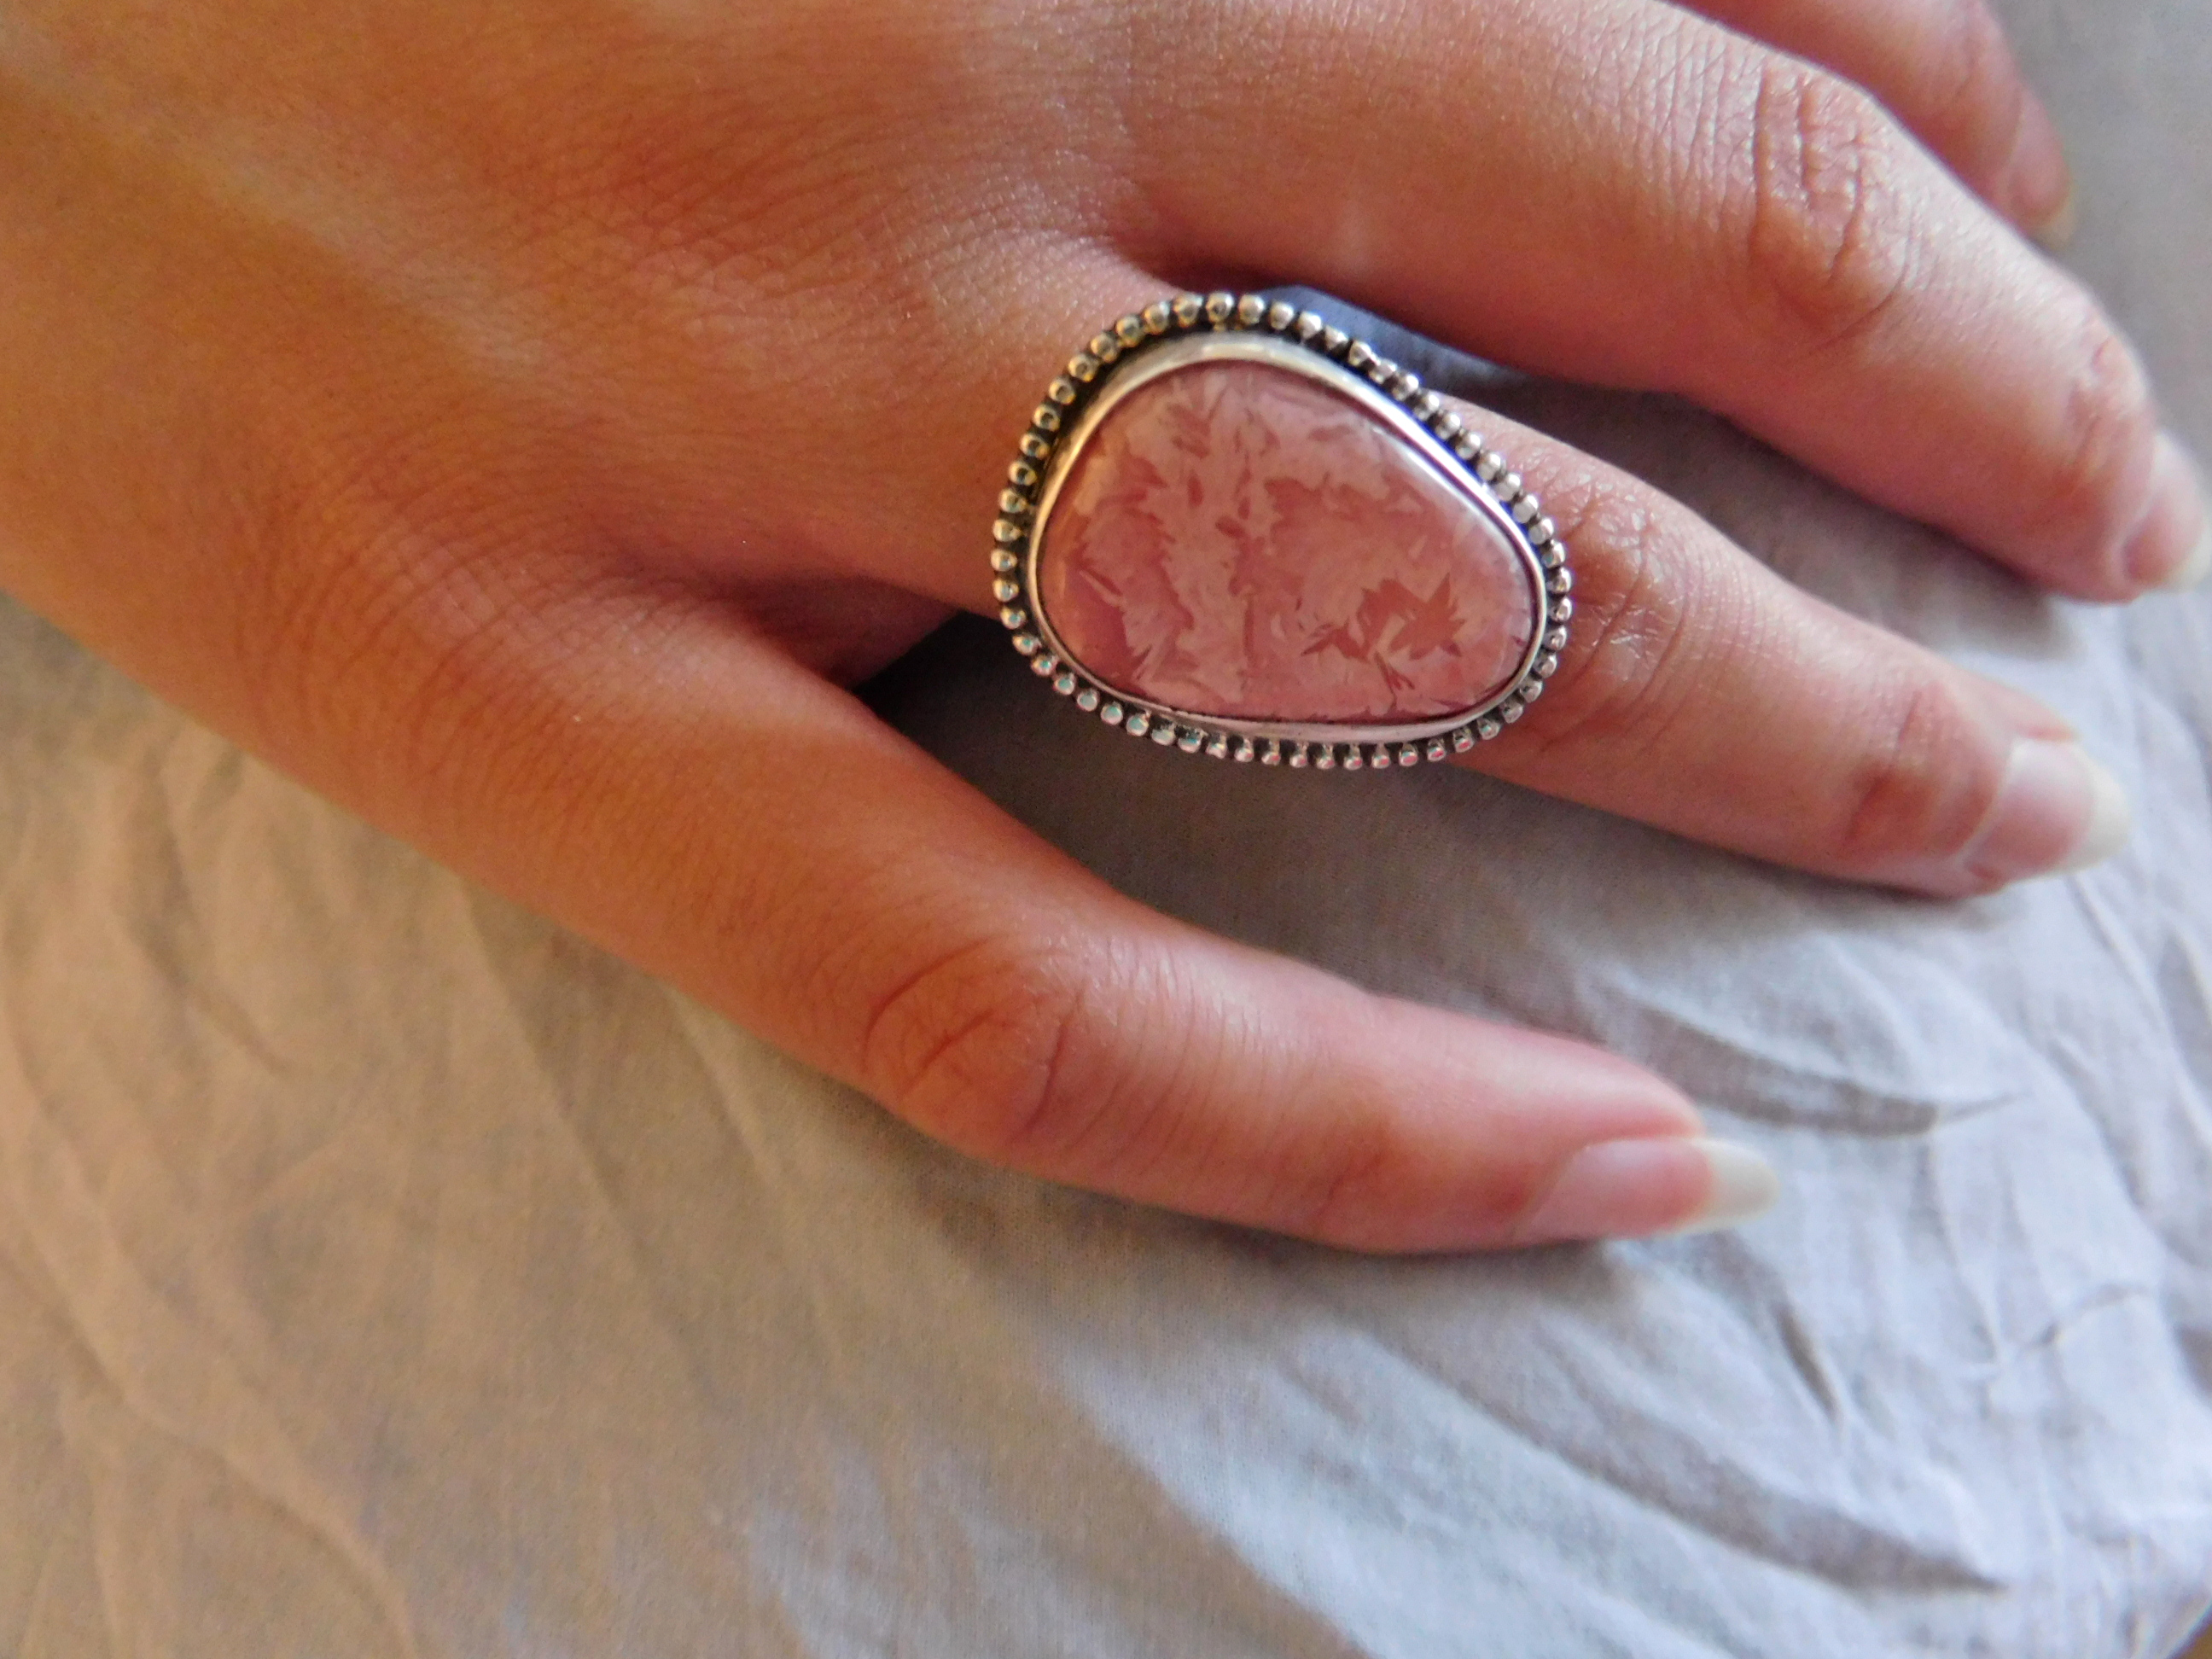 Rhodochrosite ring in hand forged decorative setting - Sterling silver